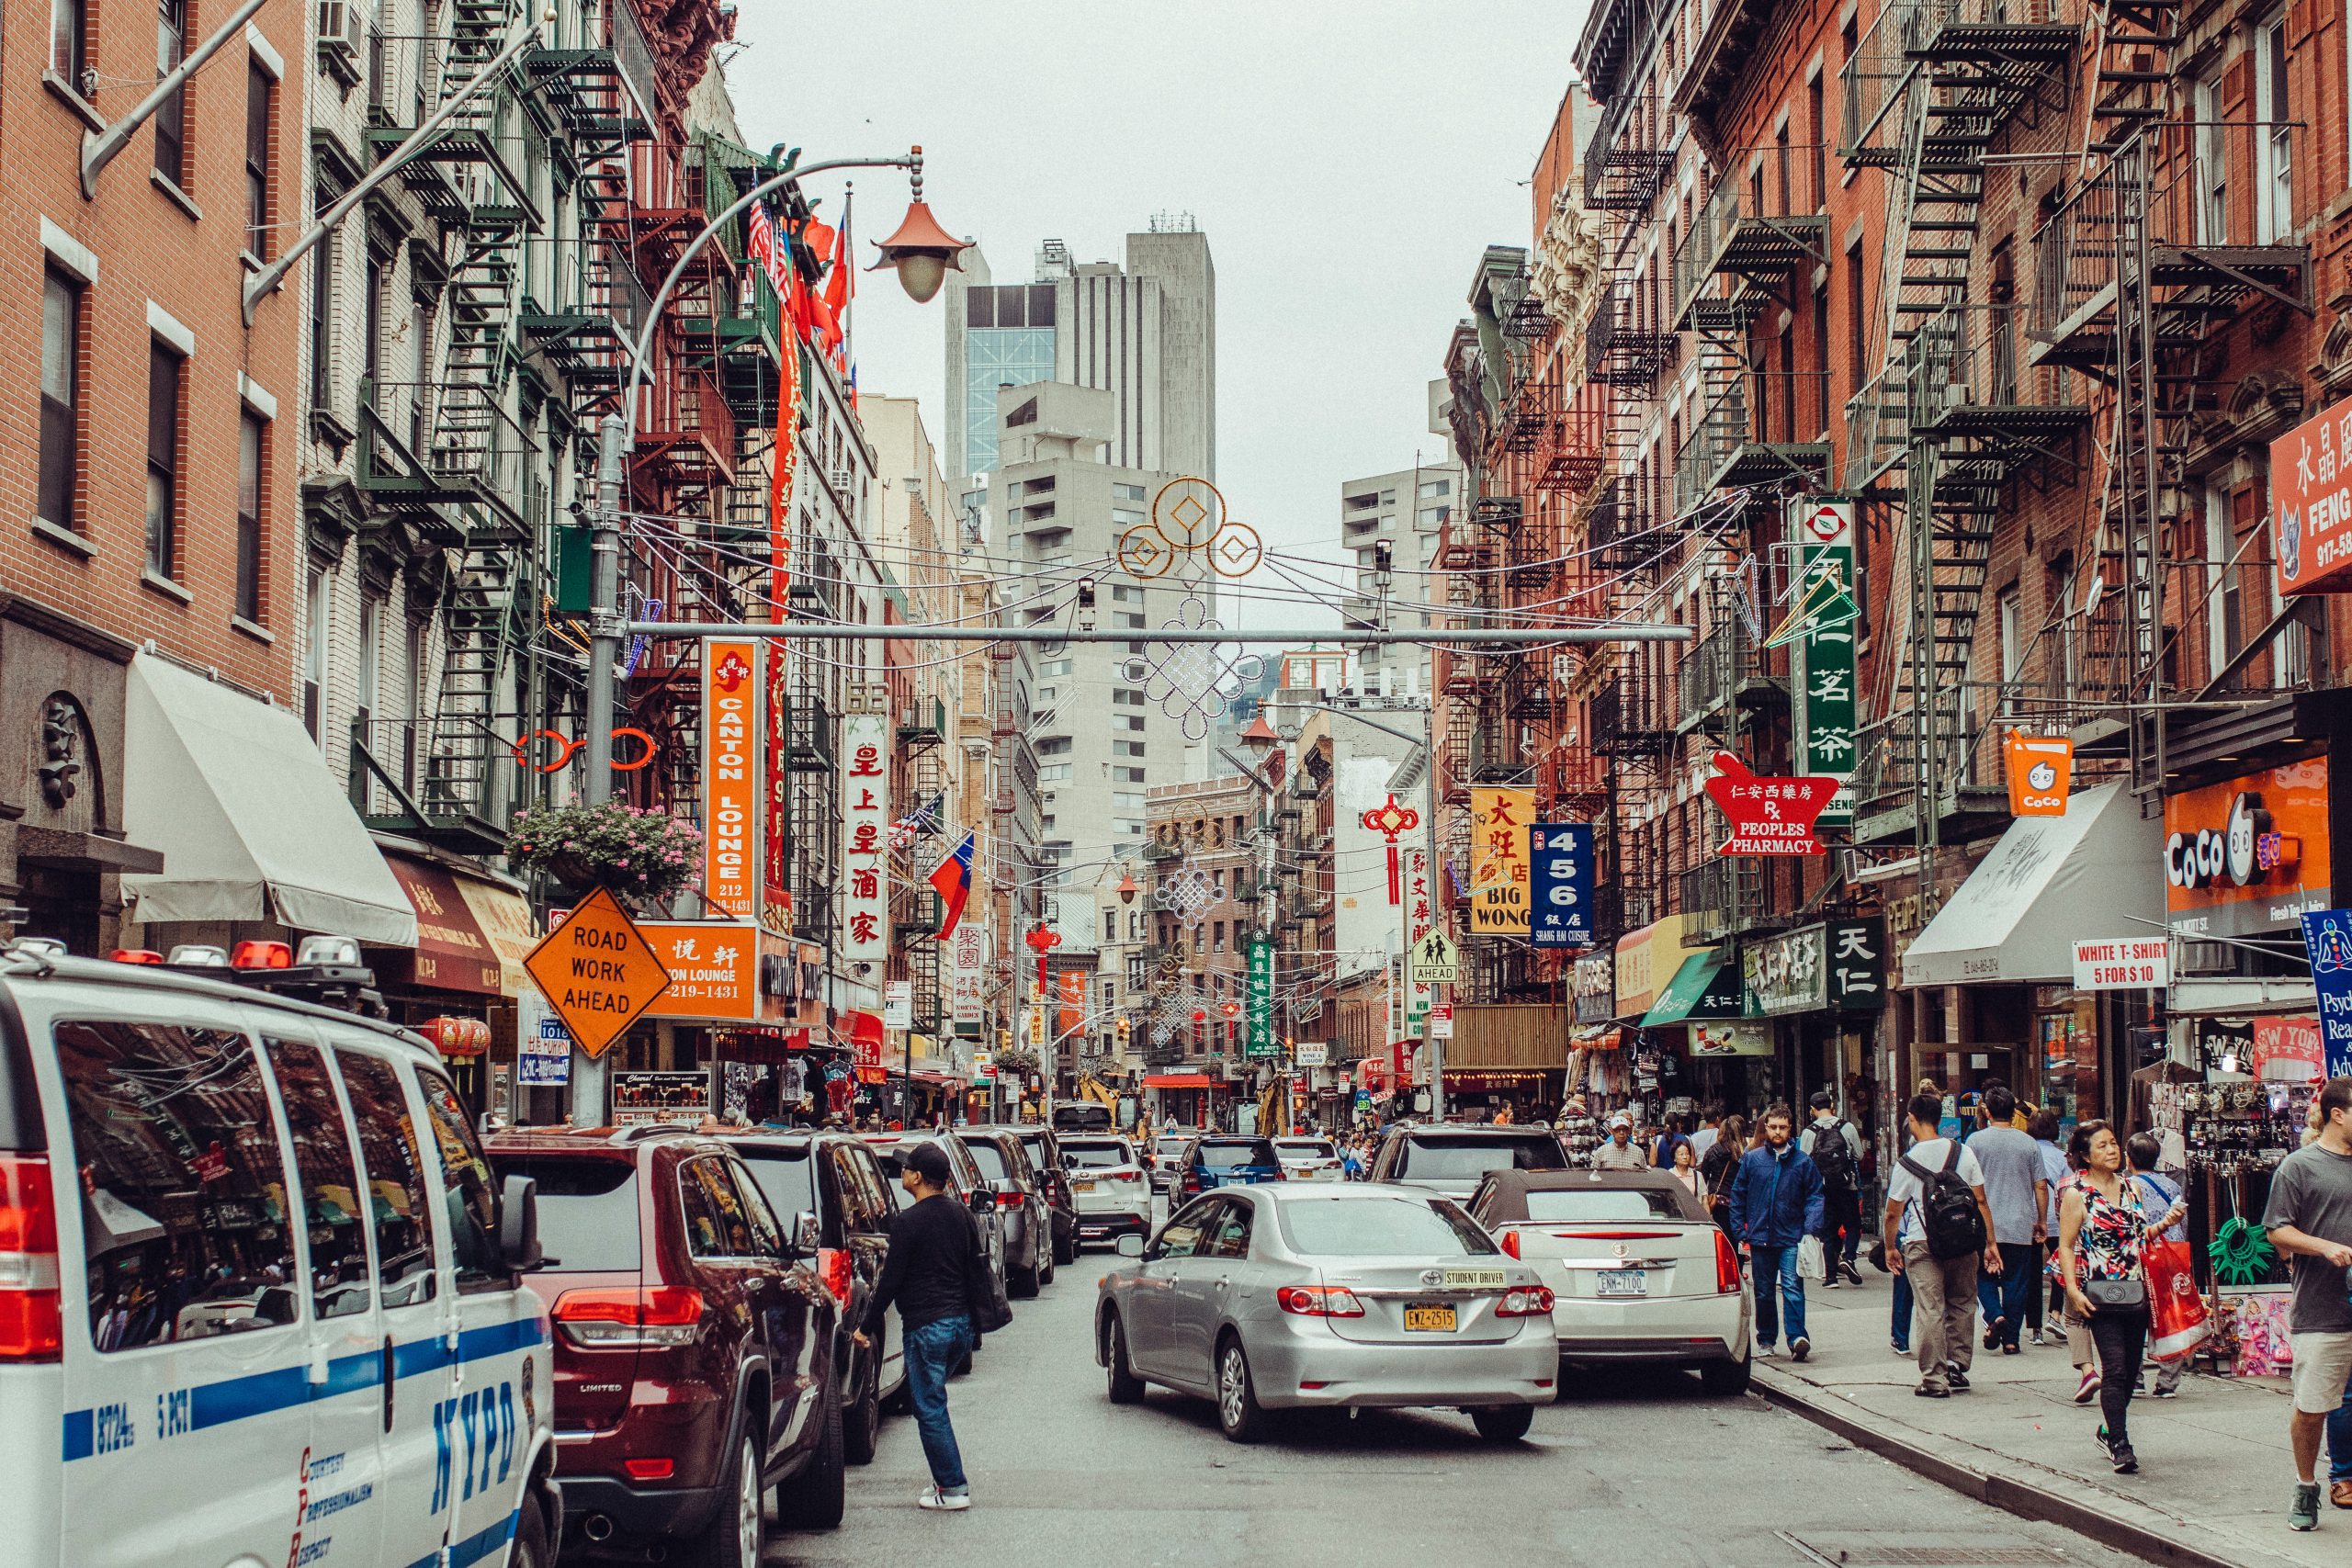 in an article about assisting the AAPI community, photo of New York City Chinatown